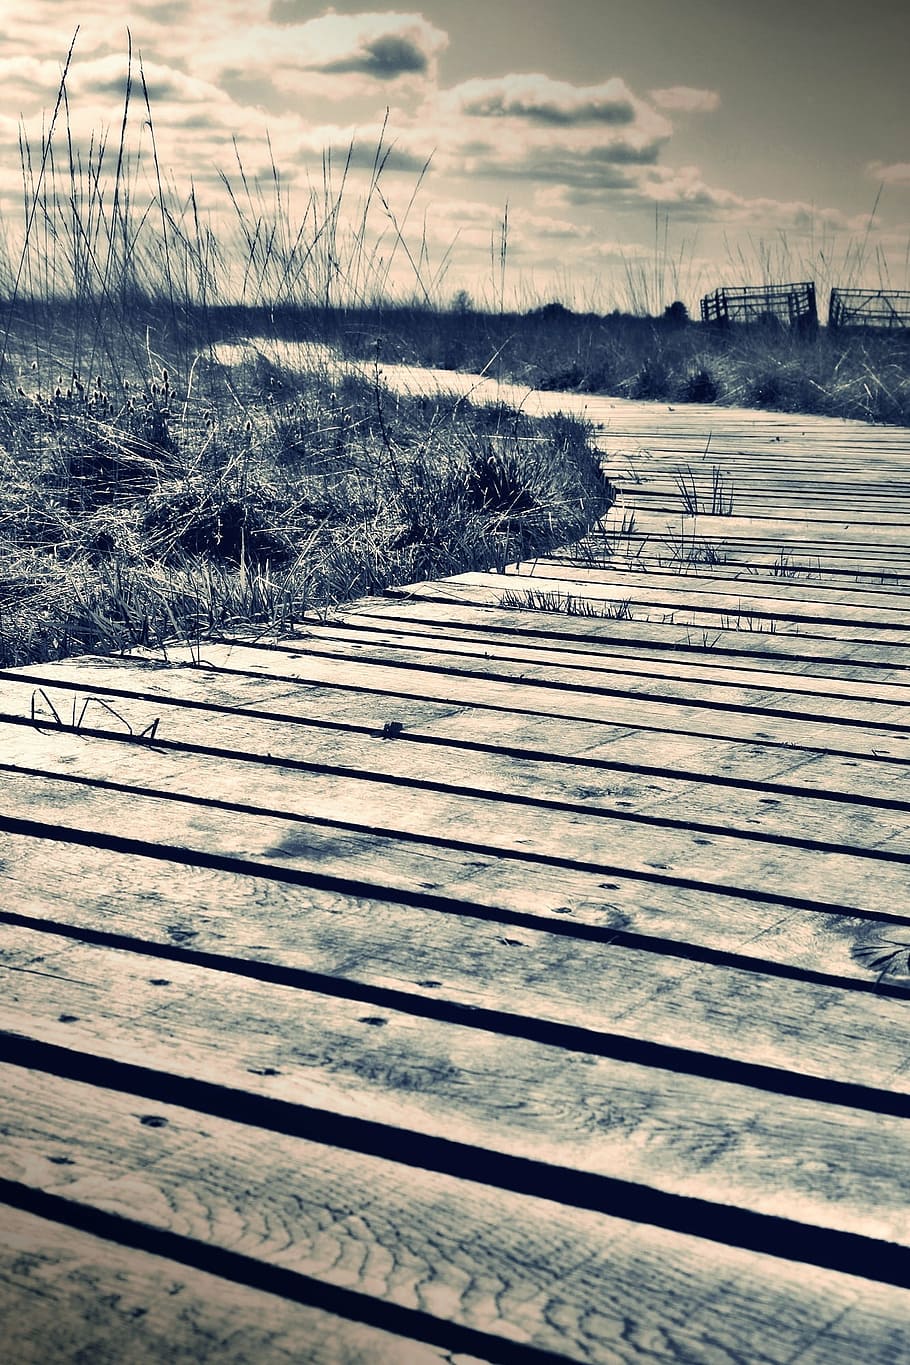 filtered, photography, wooden, dock, overlooking, grassy, fieldds, web, moor, lonely